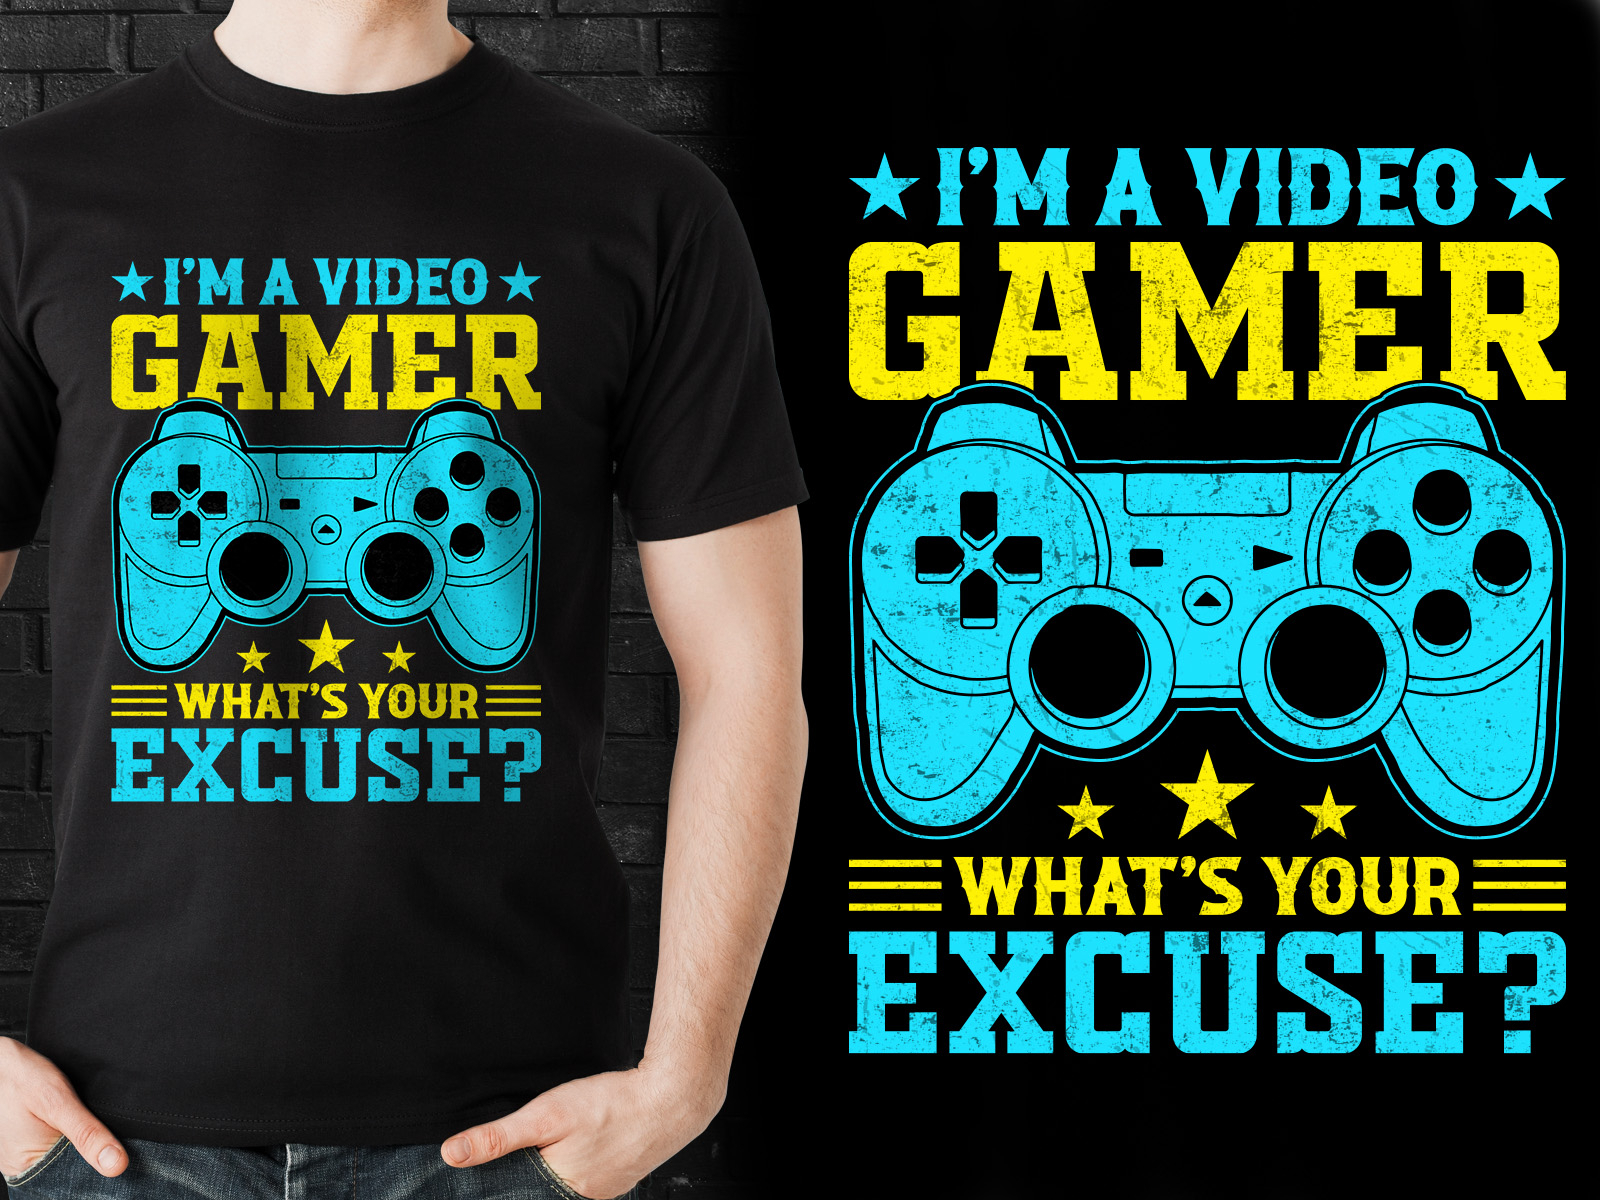 Game T-Shirt Design by Md.Baijid Hossain on Dribbble